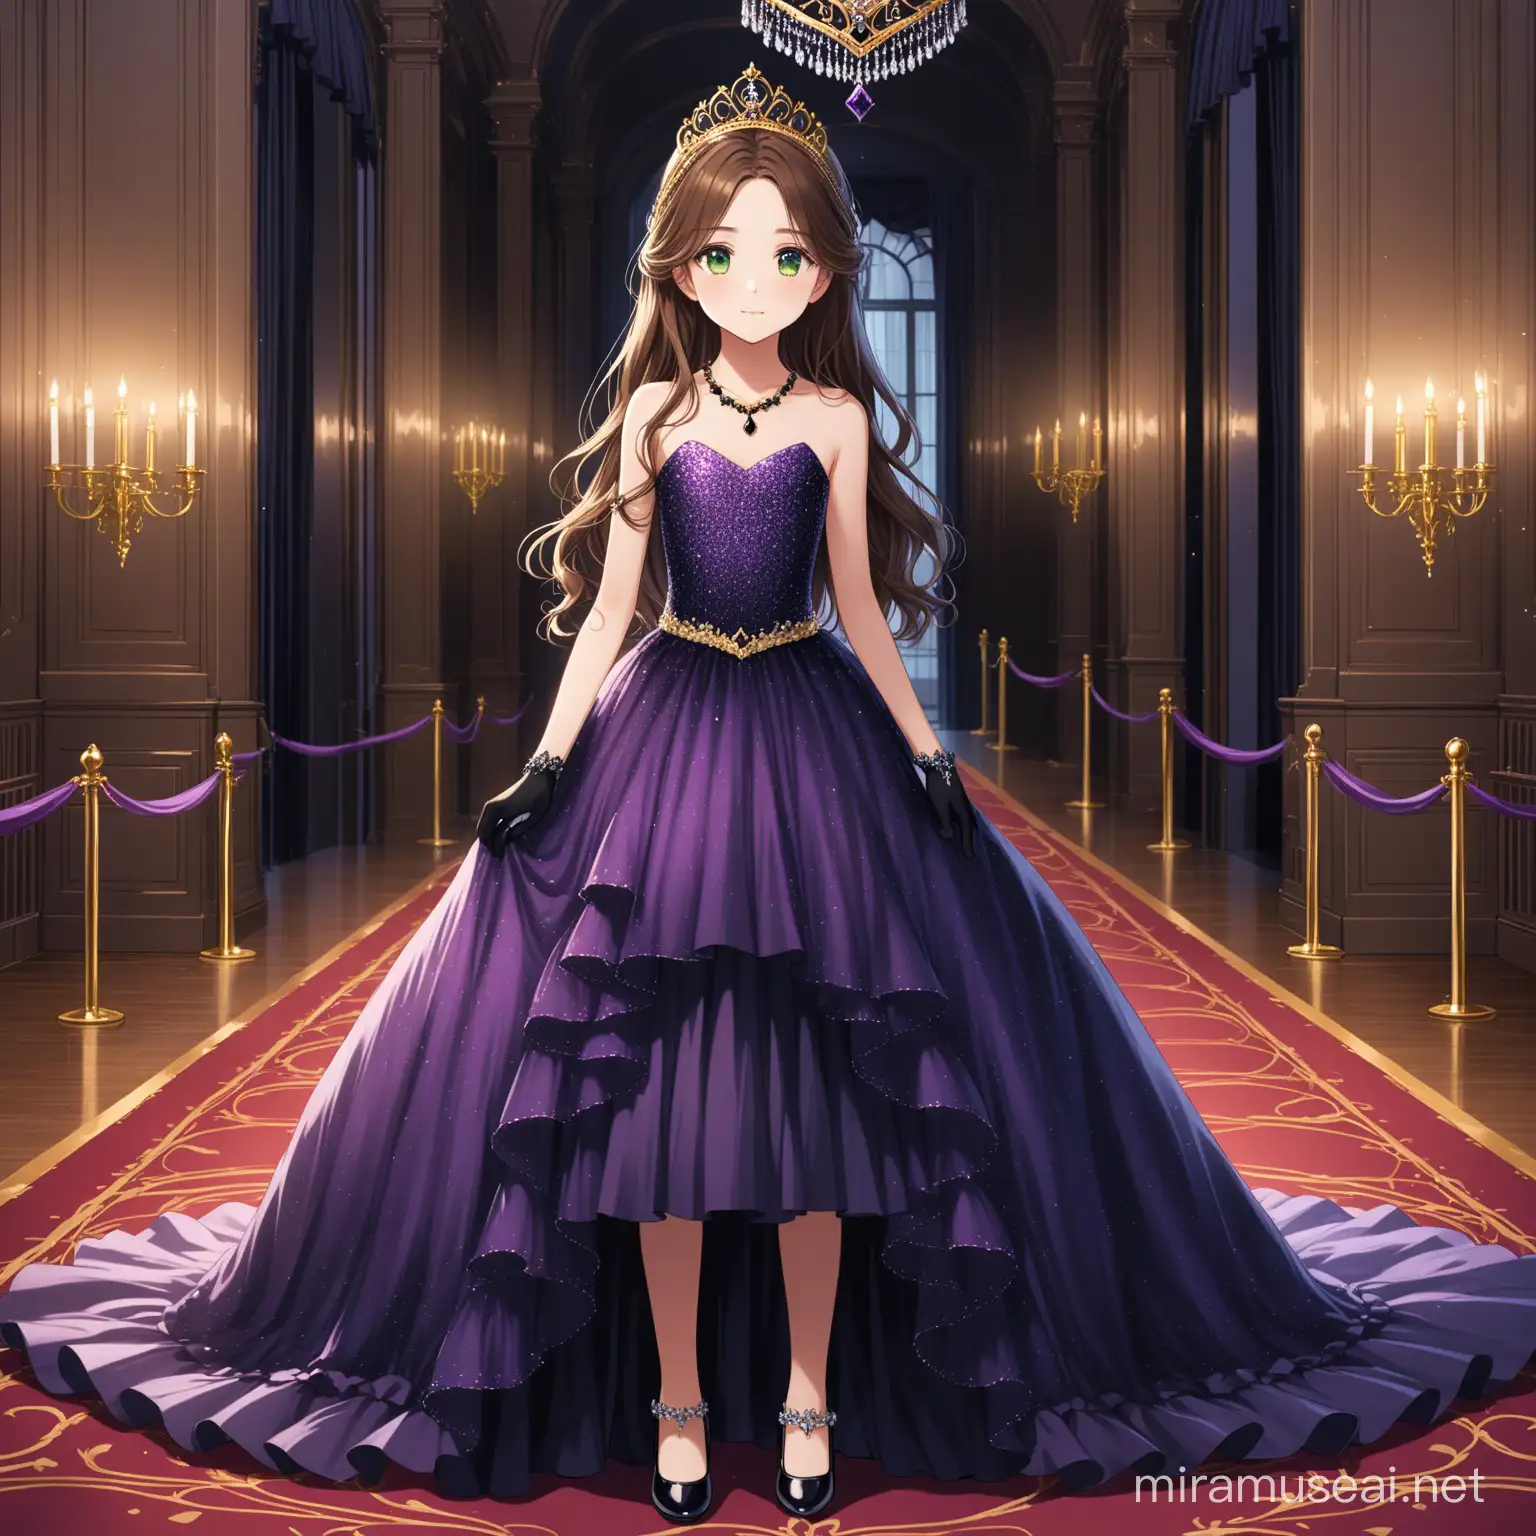 11 year old girl, long flowy brown hair, gold tiara, purple ball gown with a ribbon, black dainty shoes, black evening gloves, black necklace, grand mansion, green eyes, dark blue gloves,